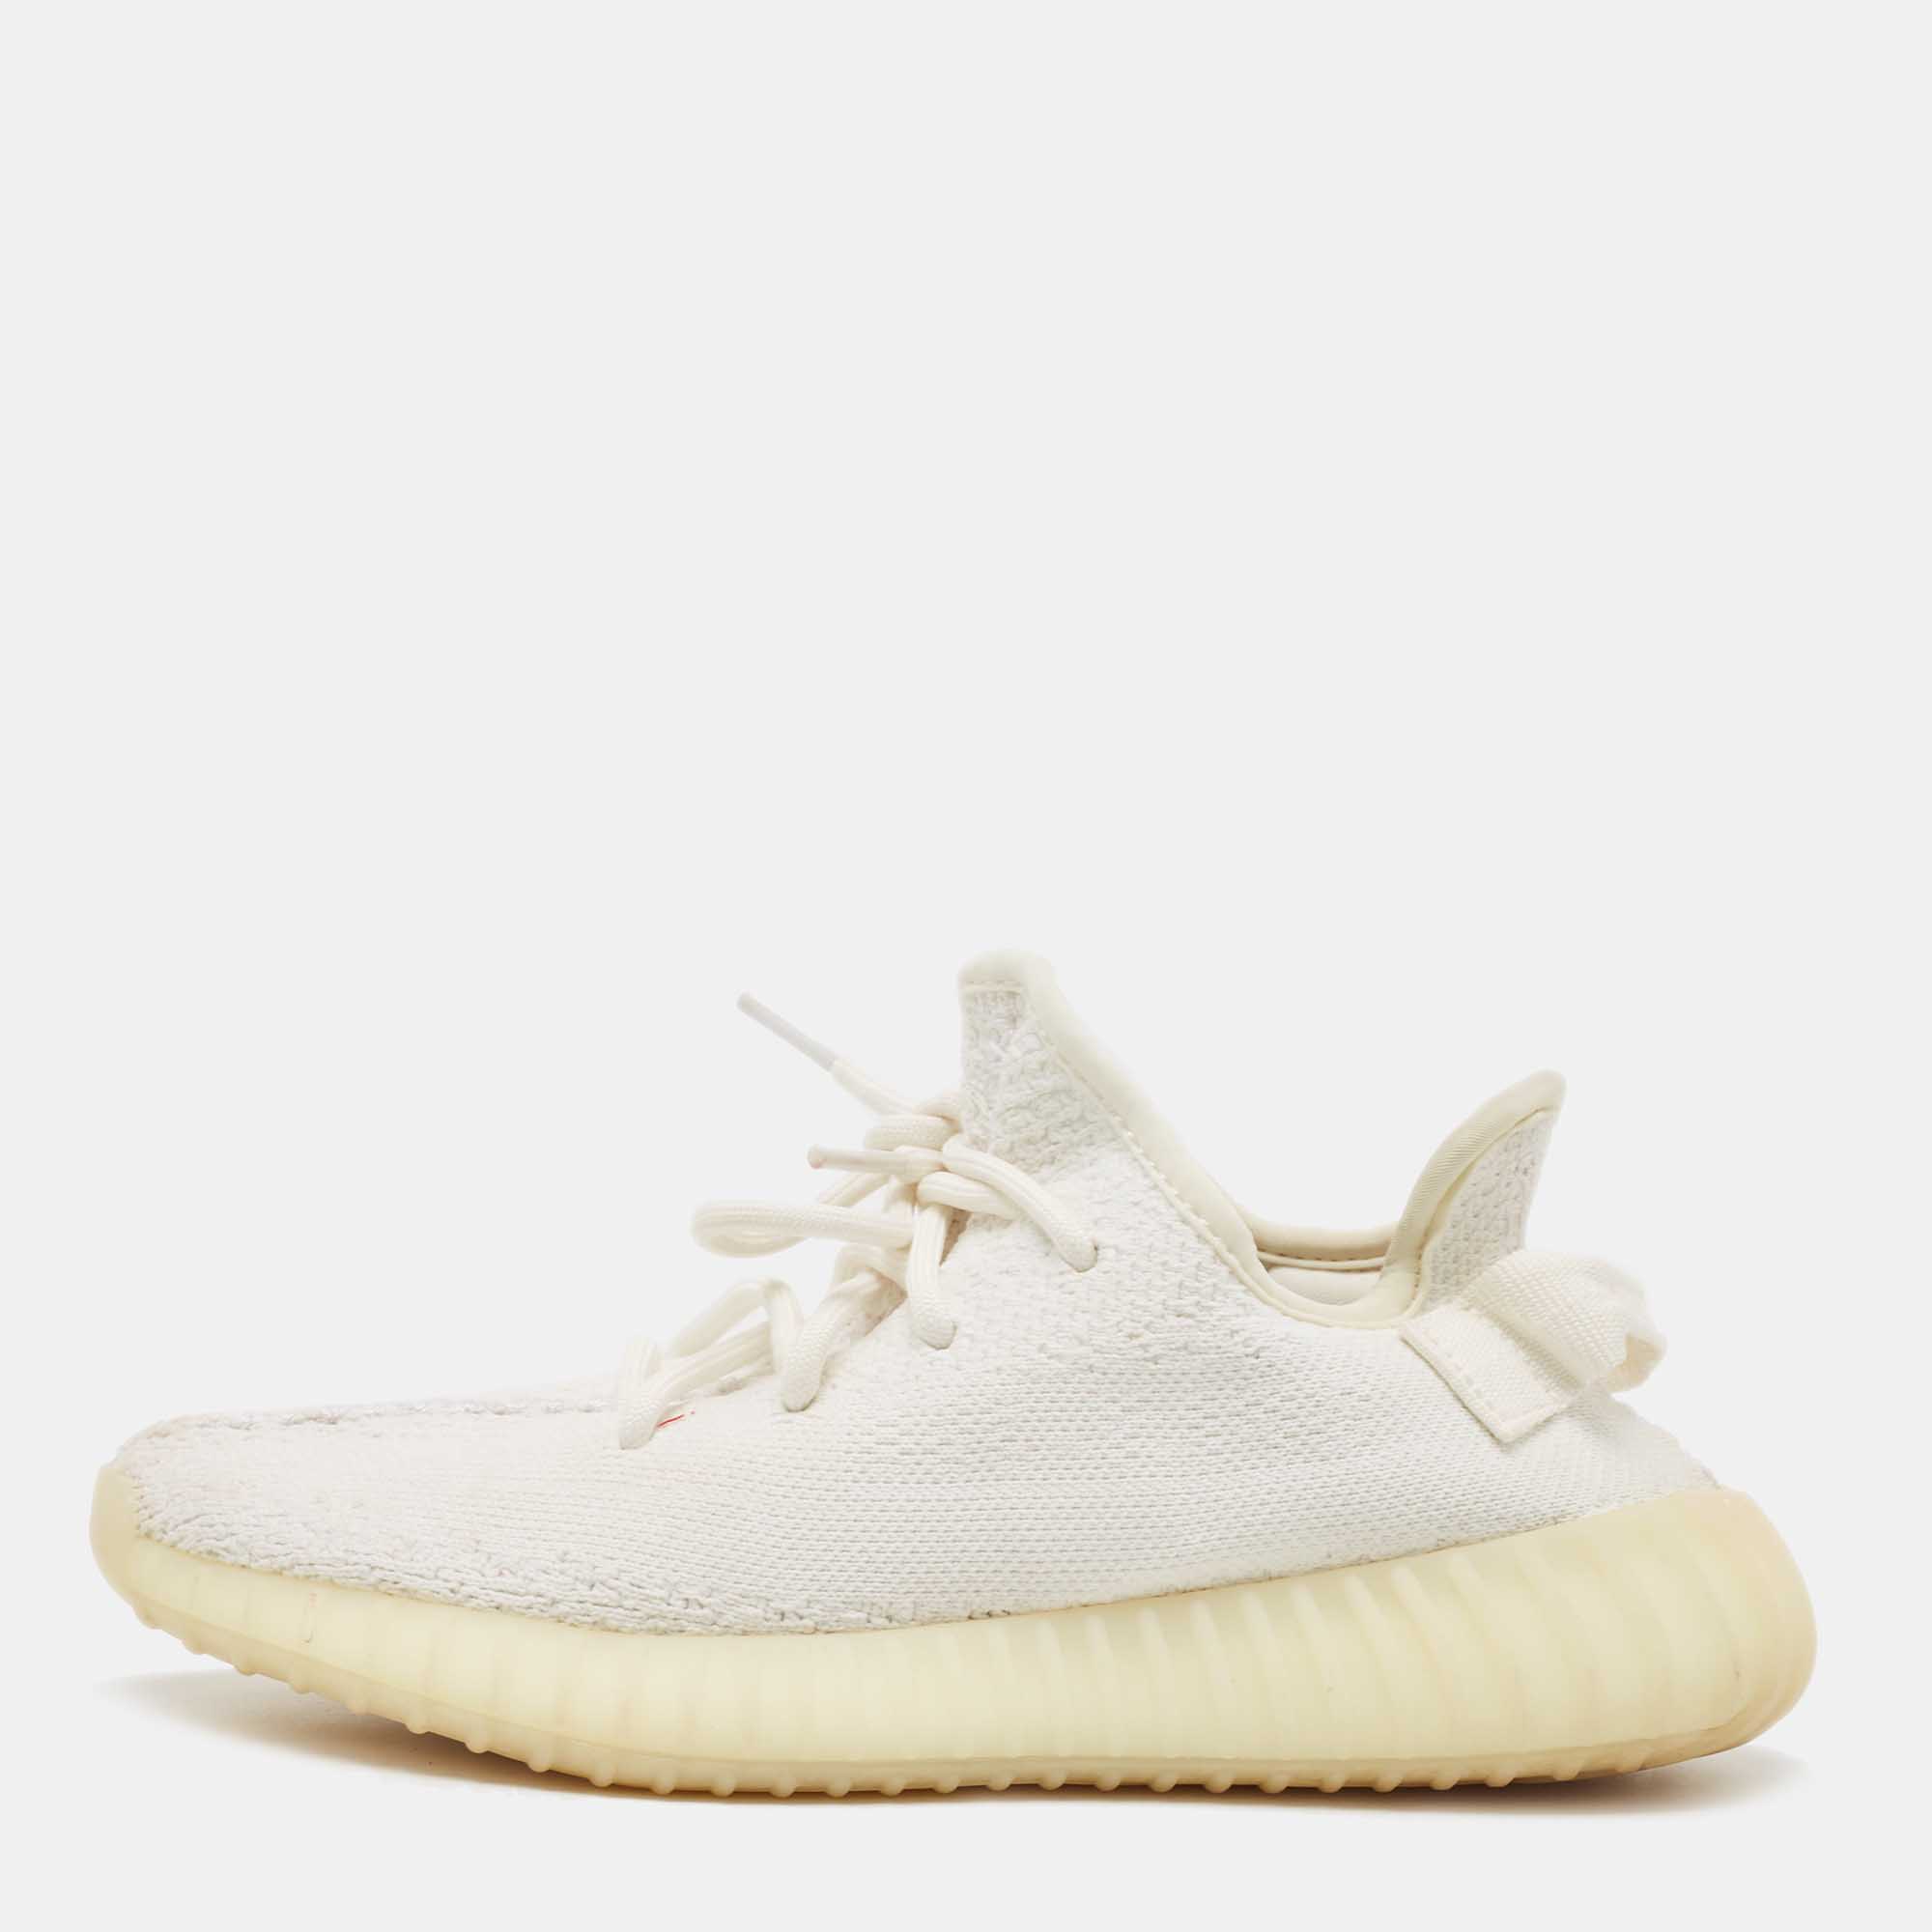 Pre-owned Yeezy X Adidas Cotton Knit Boost 350 V2 Triple White Sneakers Size Fr 37 1/3